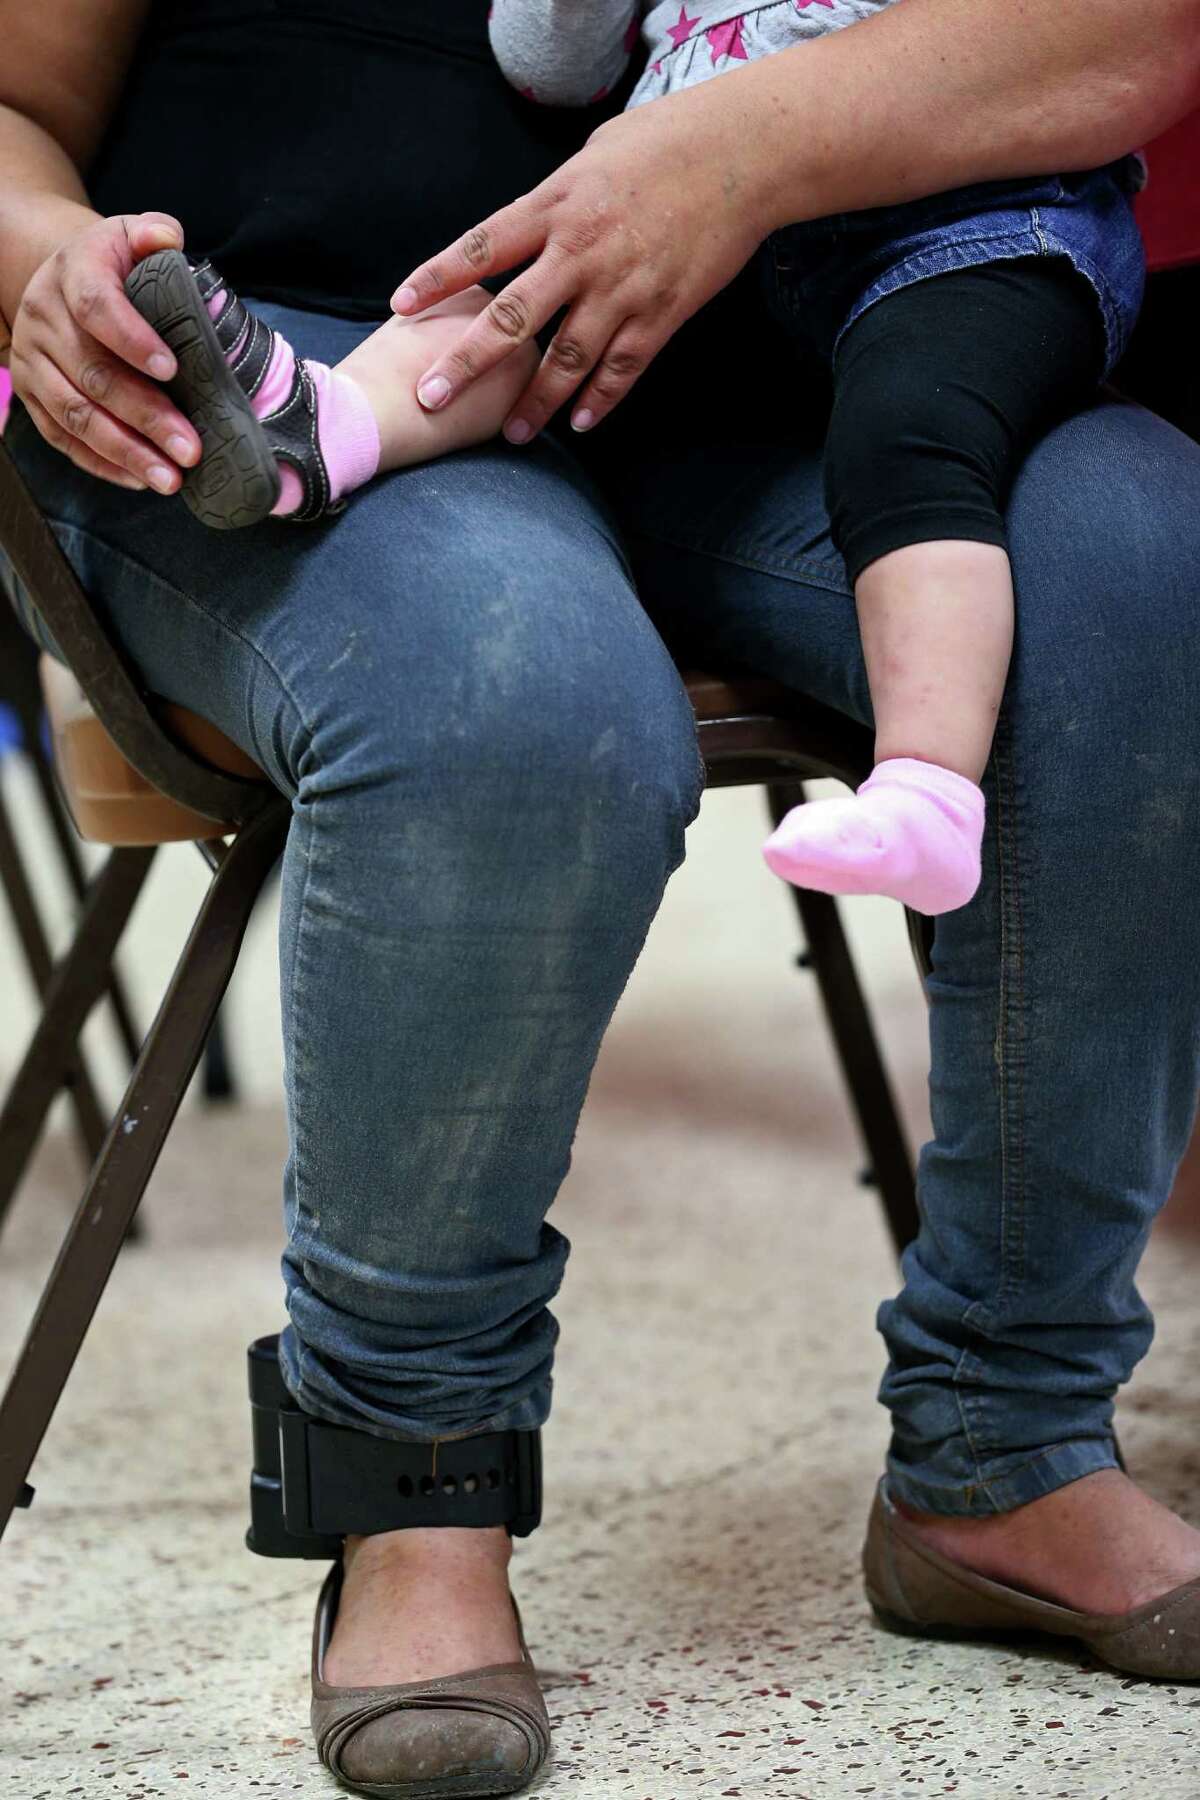 A Central American immigrant wears an ankle monitor while trying shoes on her infant daughter at the Sacred Heart Catholic Church shelter, Thursday, May 21, 2015. According to volunteers, they started noticing adult immigrants with the monitors, provided by U.S. Customs and Immigration Enforcement, on May 13. After they are processed by immigration, some of the immigrants are released on their own recognizance with a date to appear before an immigration judge at the arrival destination in the US. The monitors are used to insure that they show up before a judge according to an immigration statement.